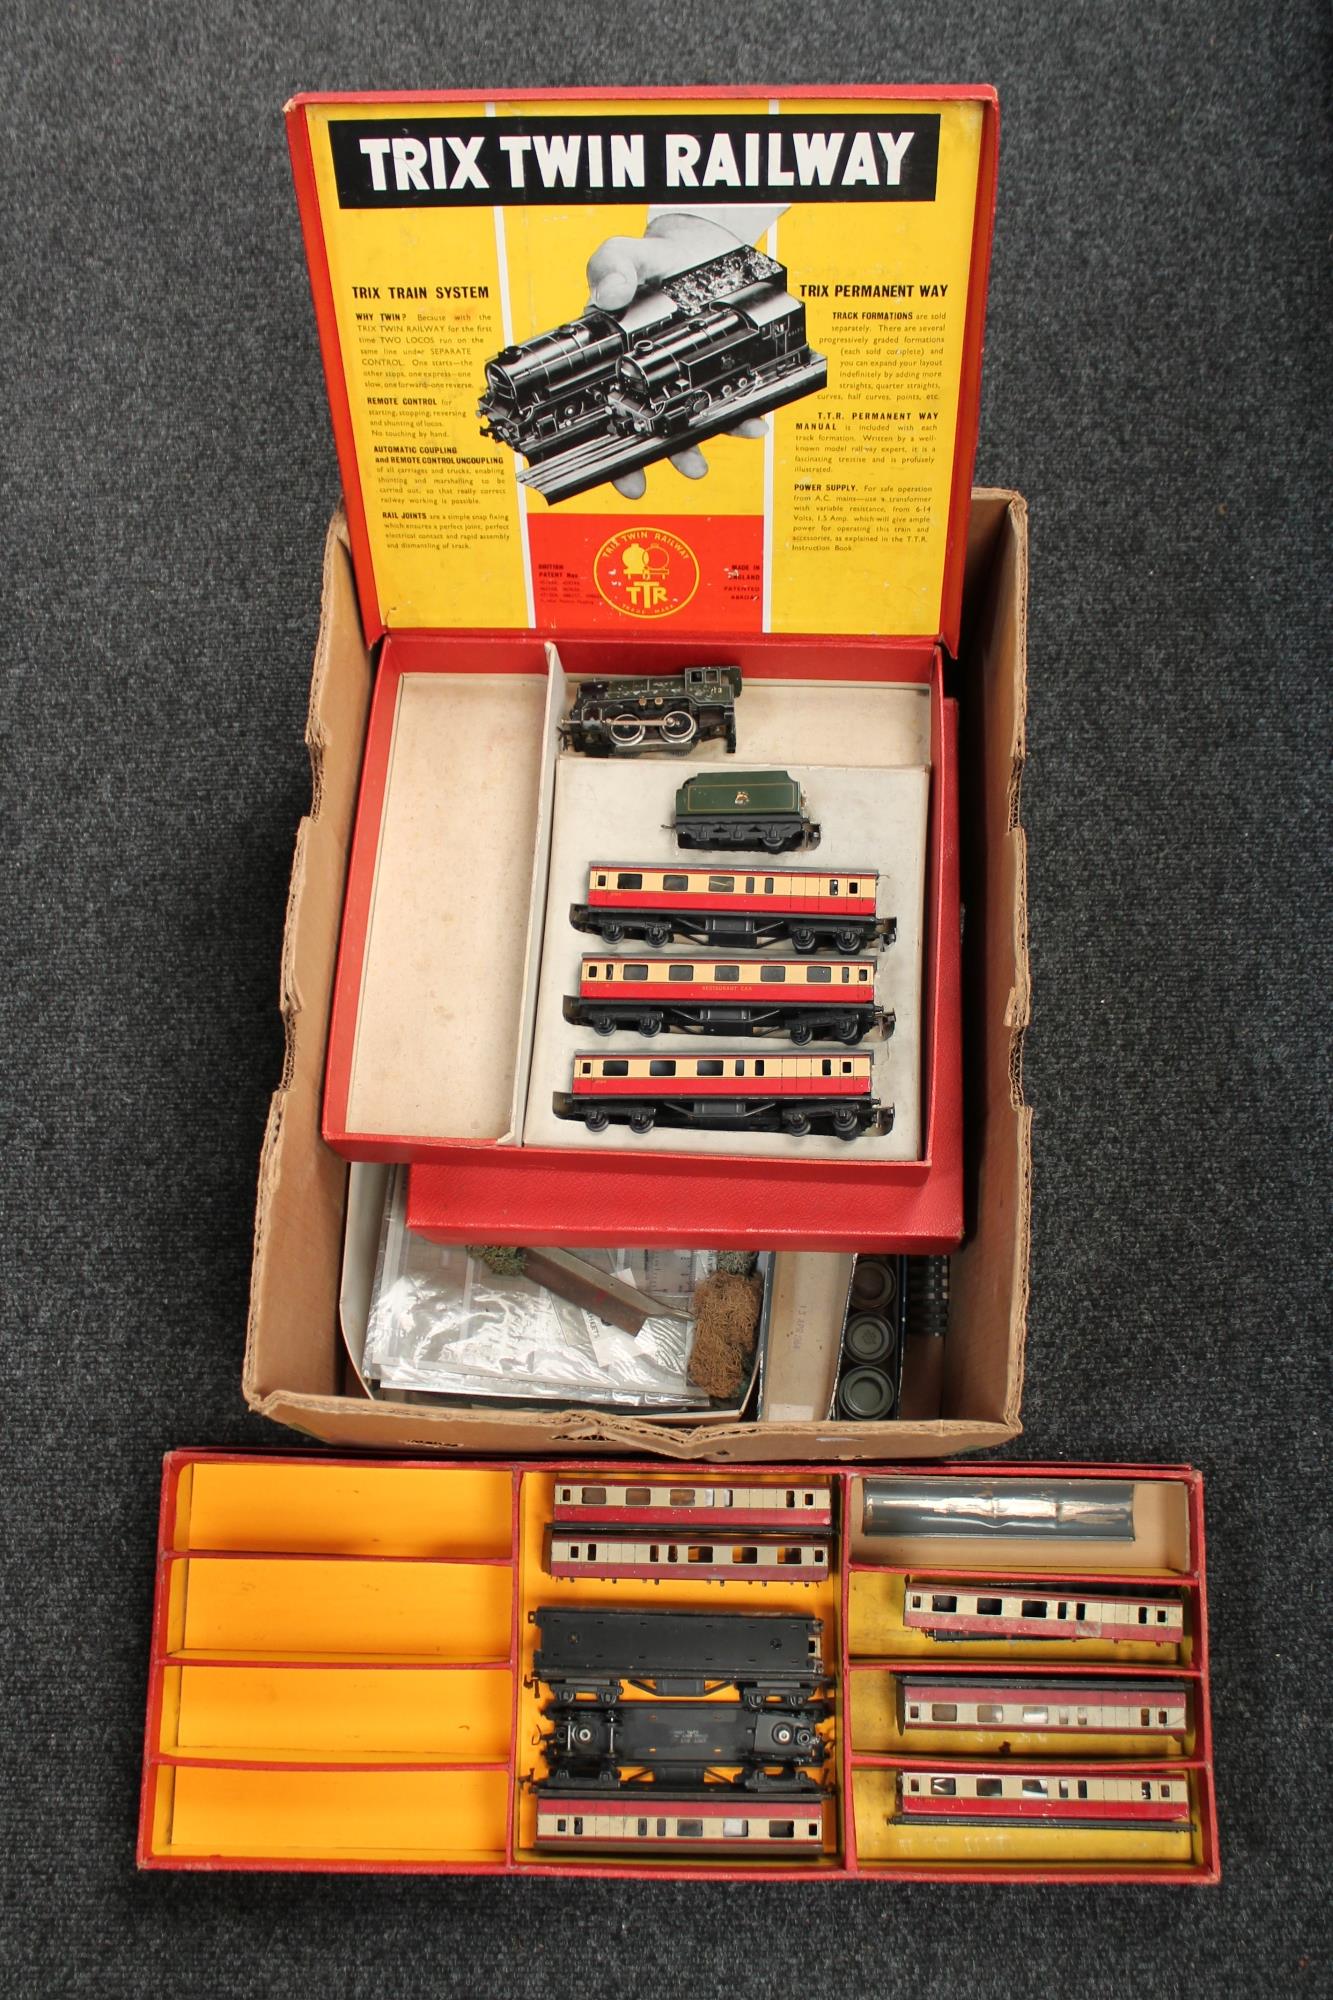 Two boxes of Trix twin railway rolling stock